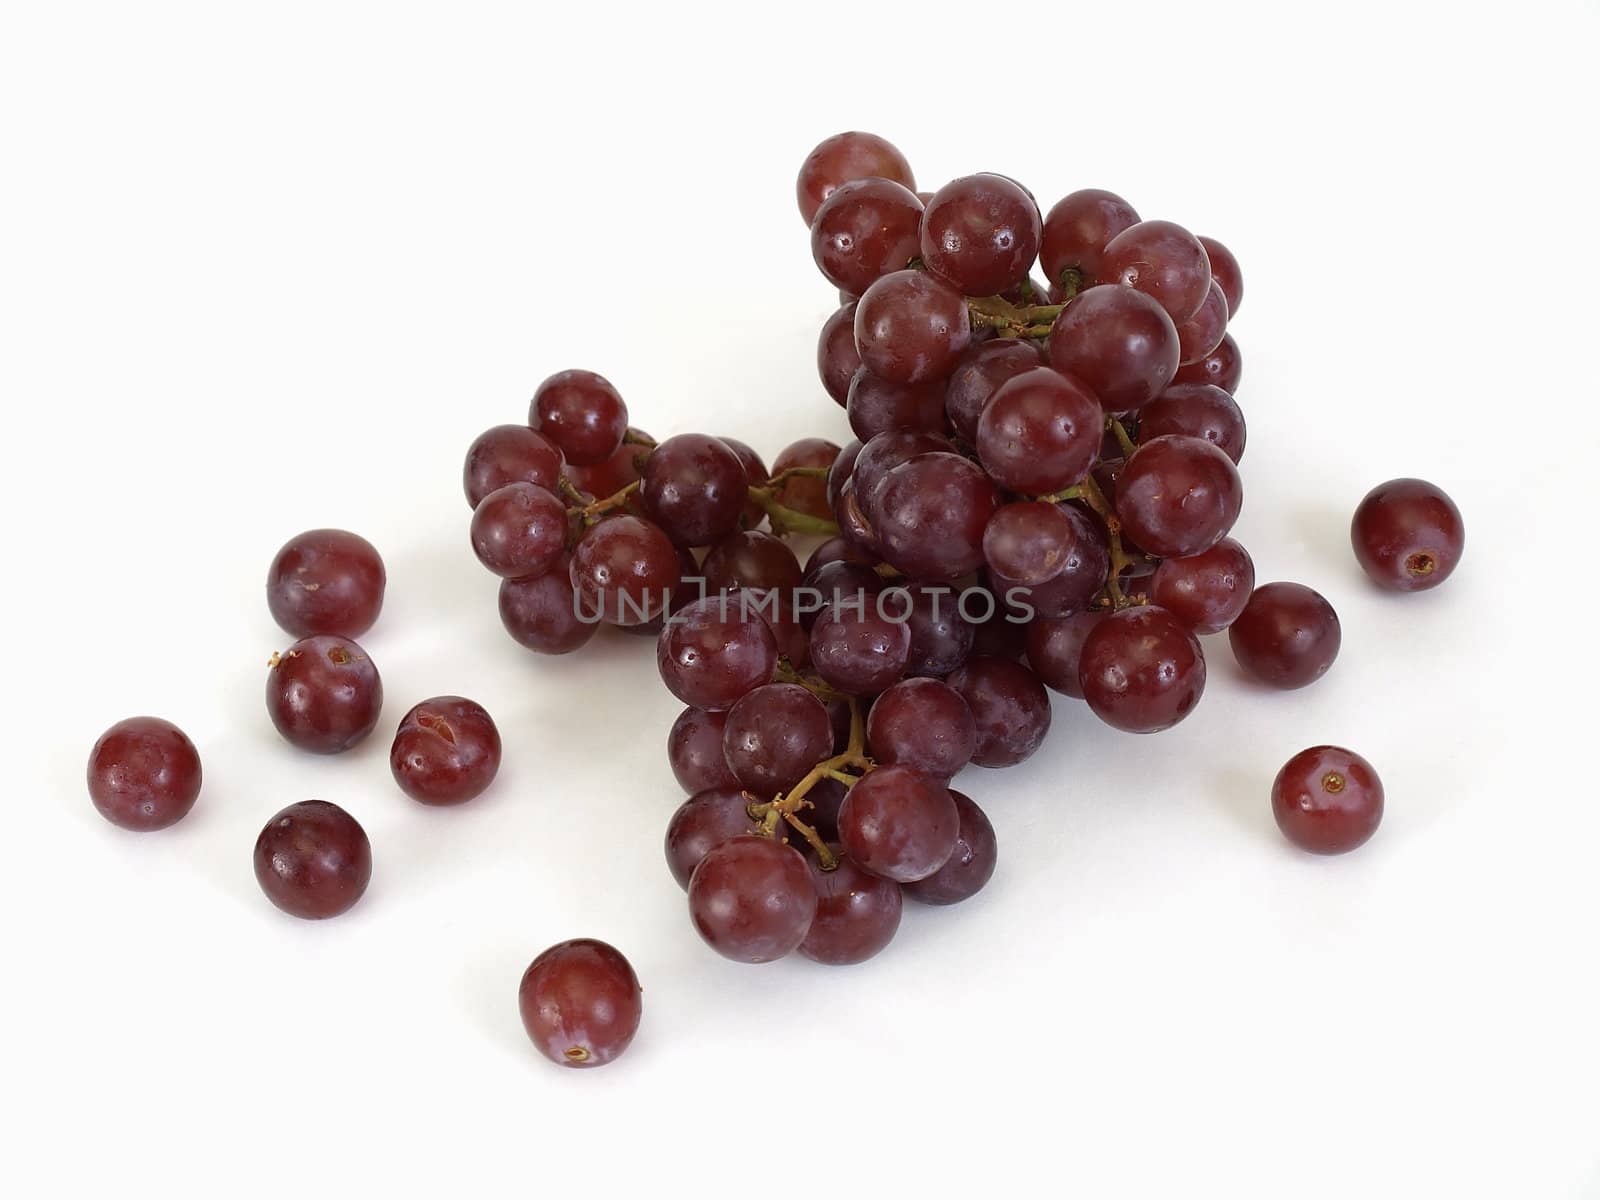 Red Grape Bunch by RGebbiePhoto